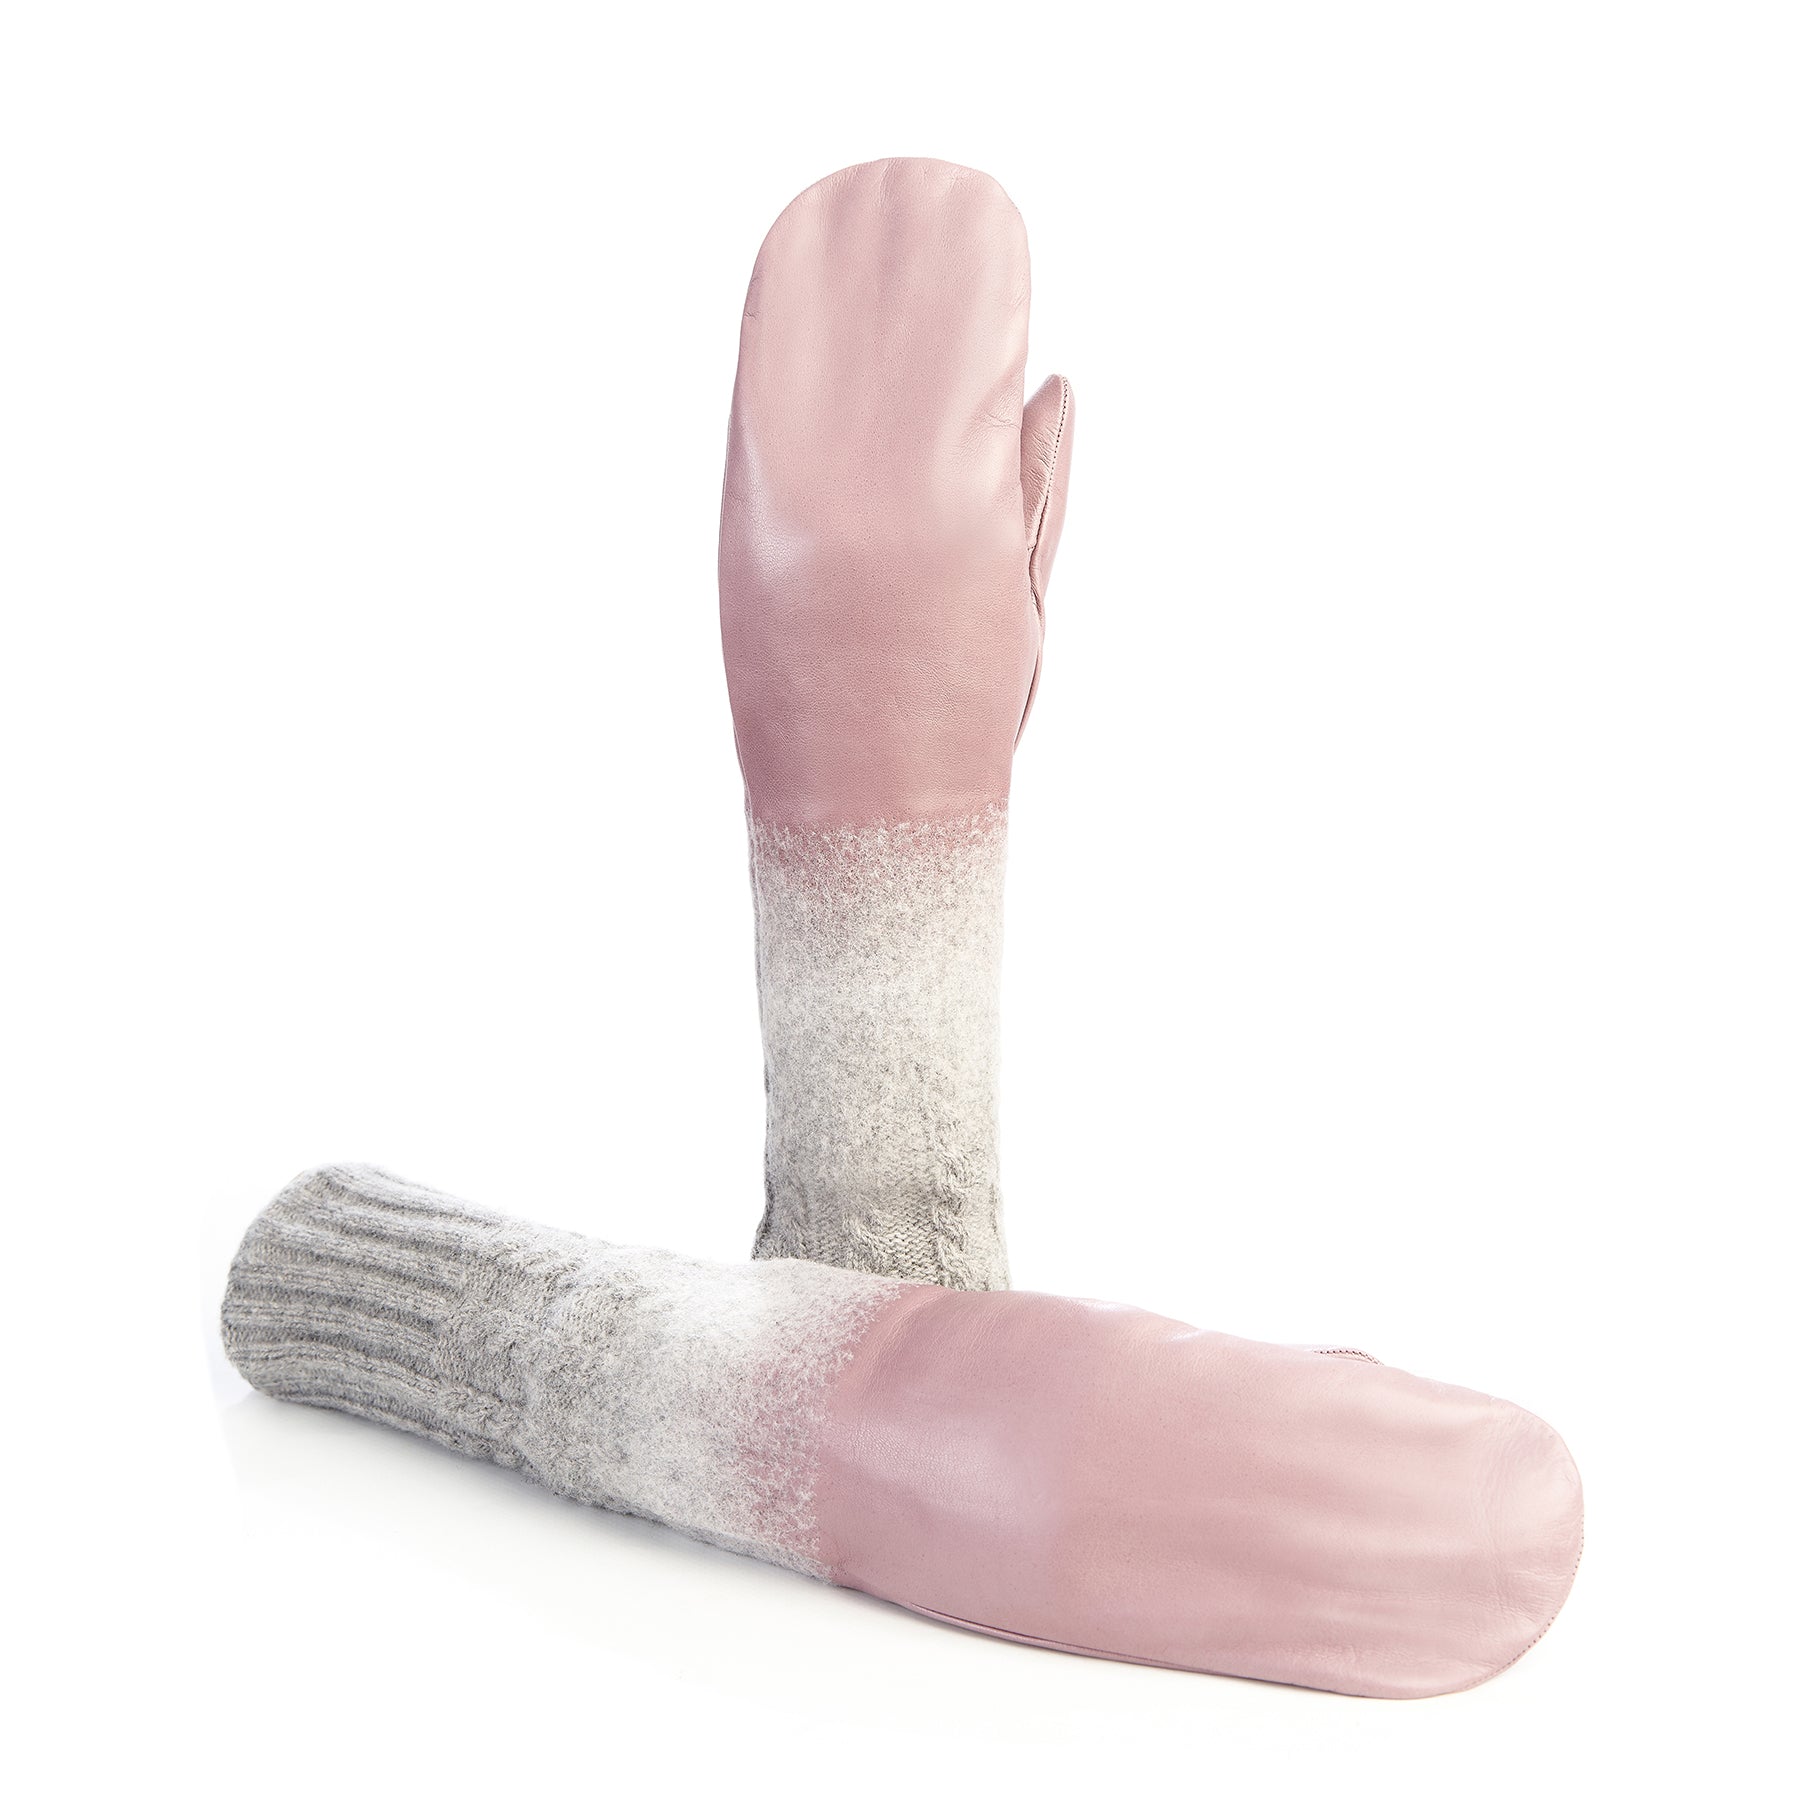 Women's mitten gloves in pink nappa leather with wool needle punch details